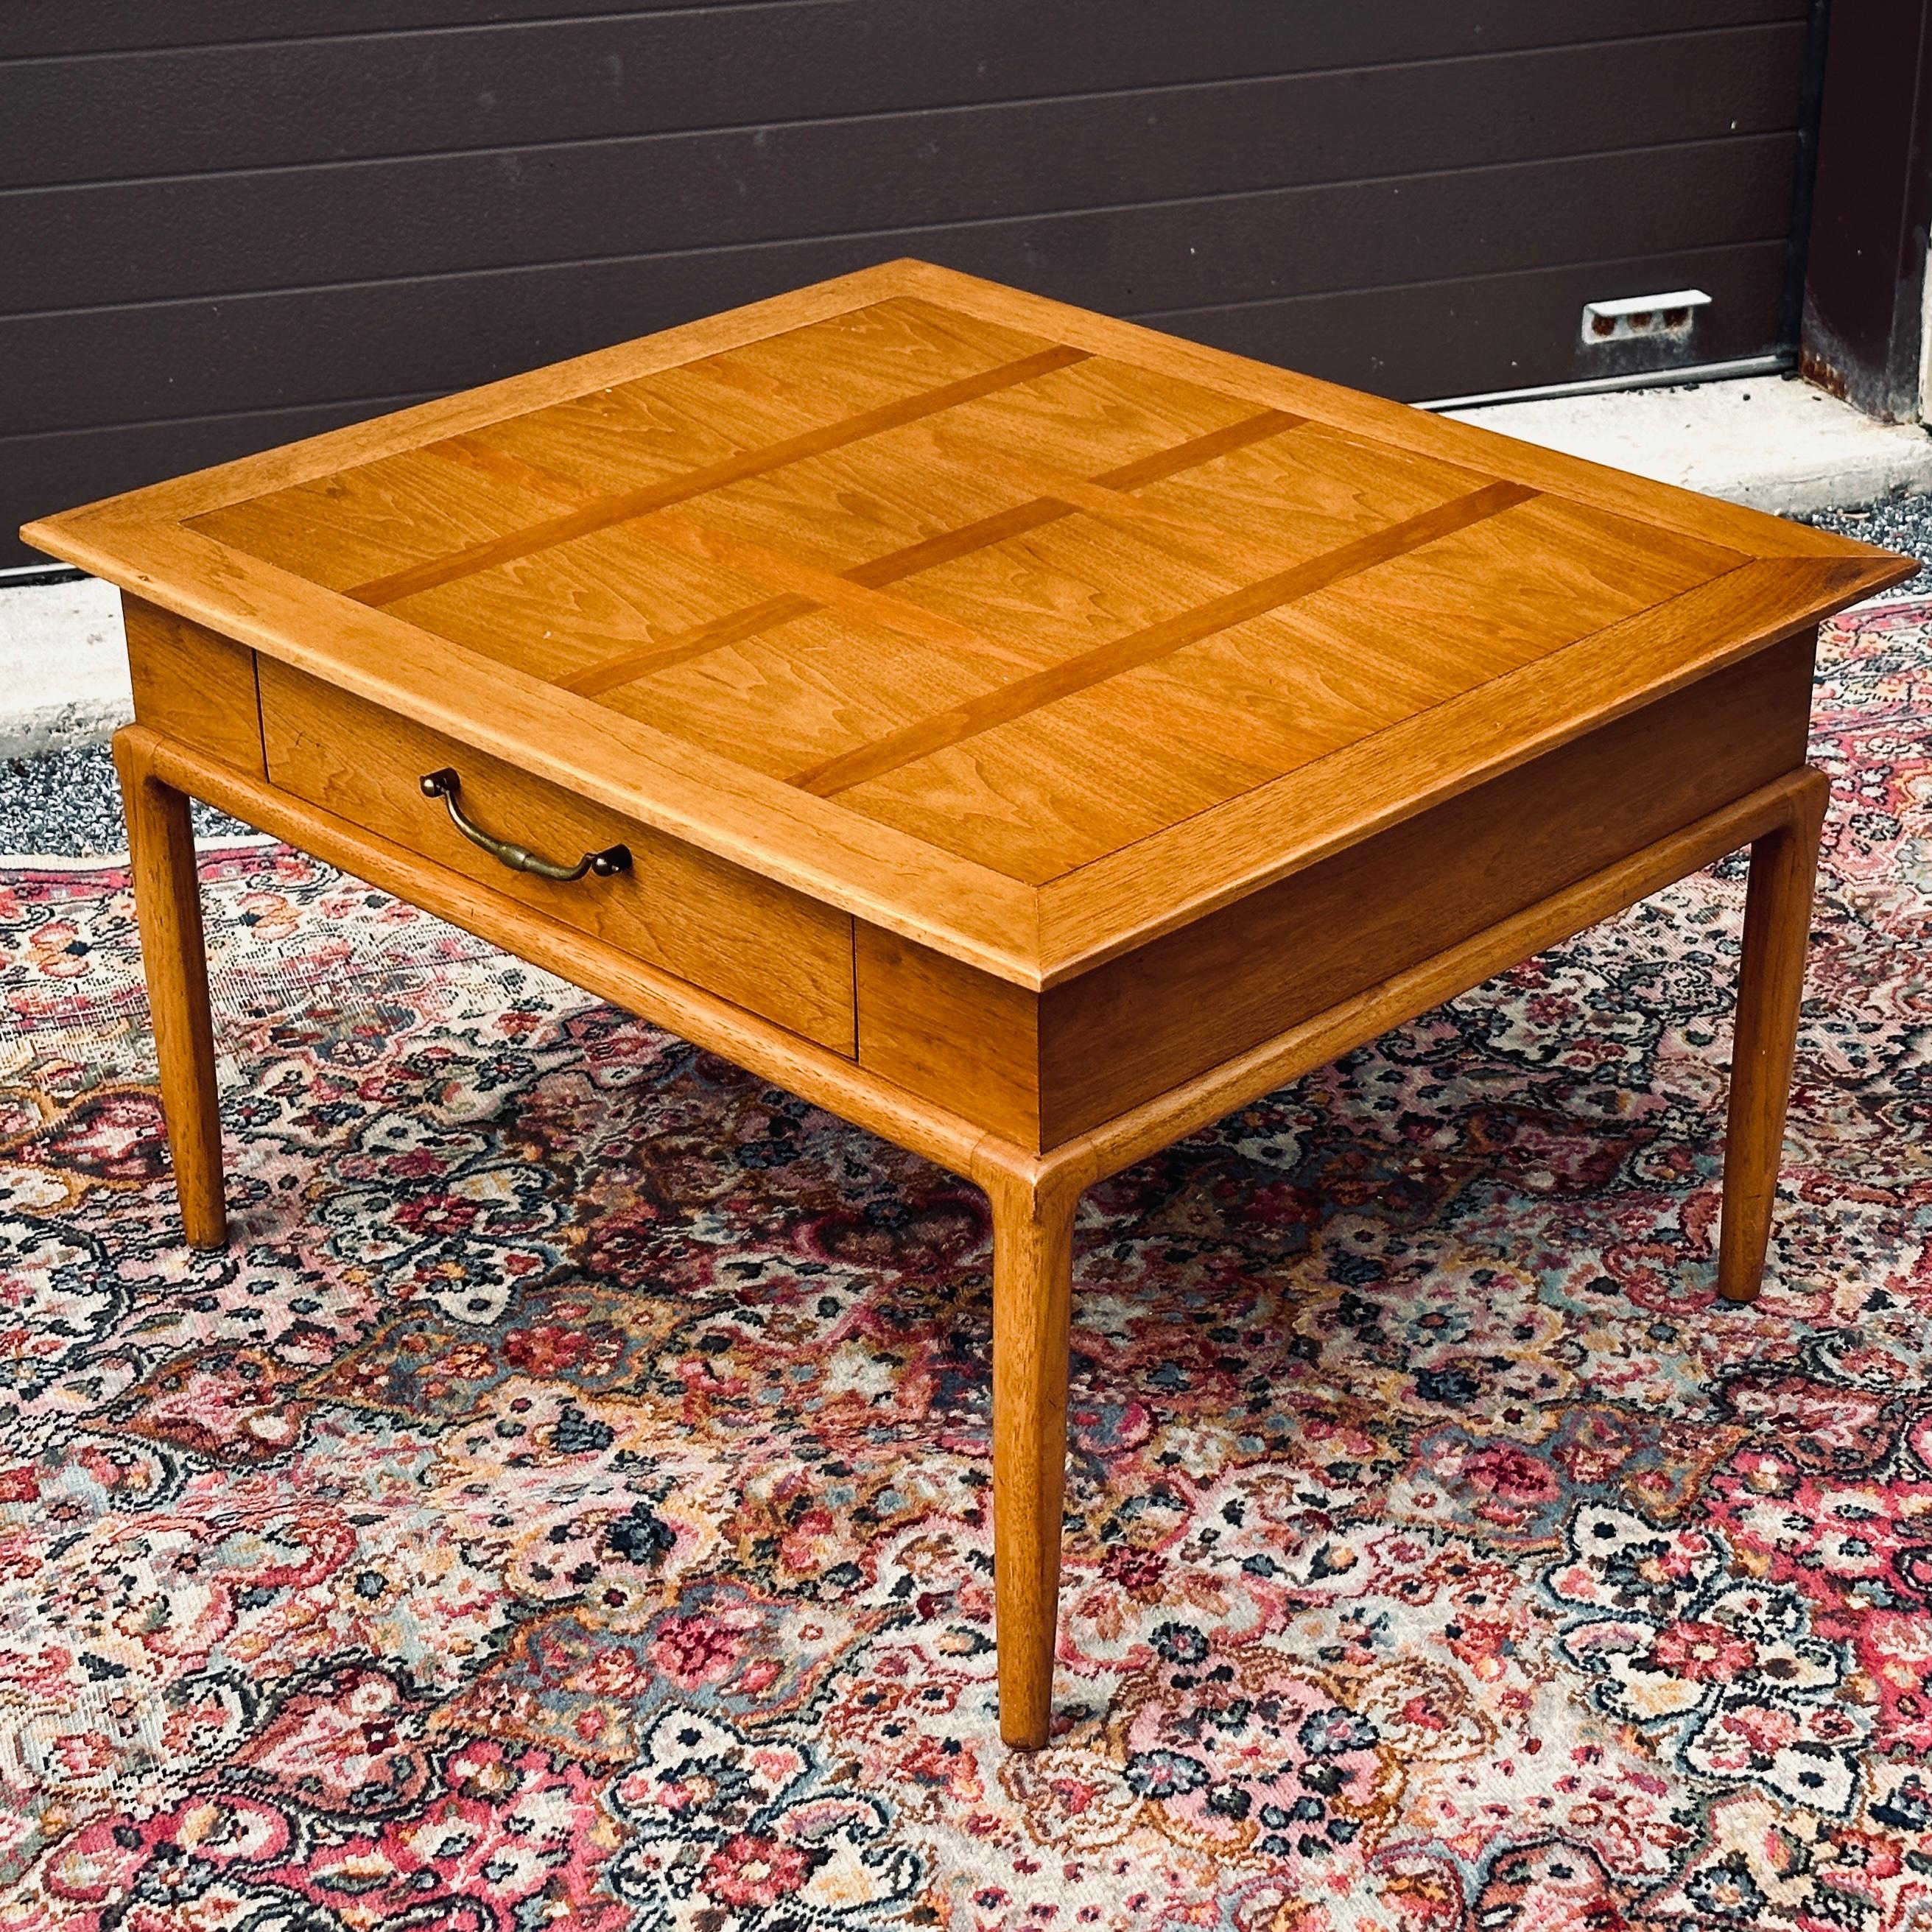 Tomlinson Sophisticate Side Table by Lubberts & Mulder In Good Condition For Sale In West Chester, PA